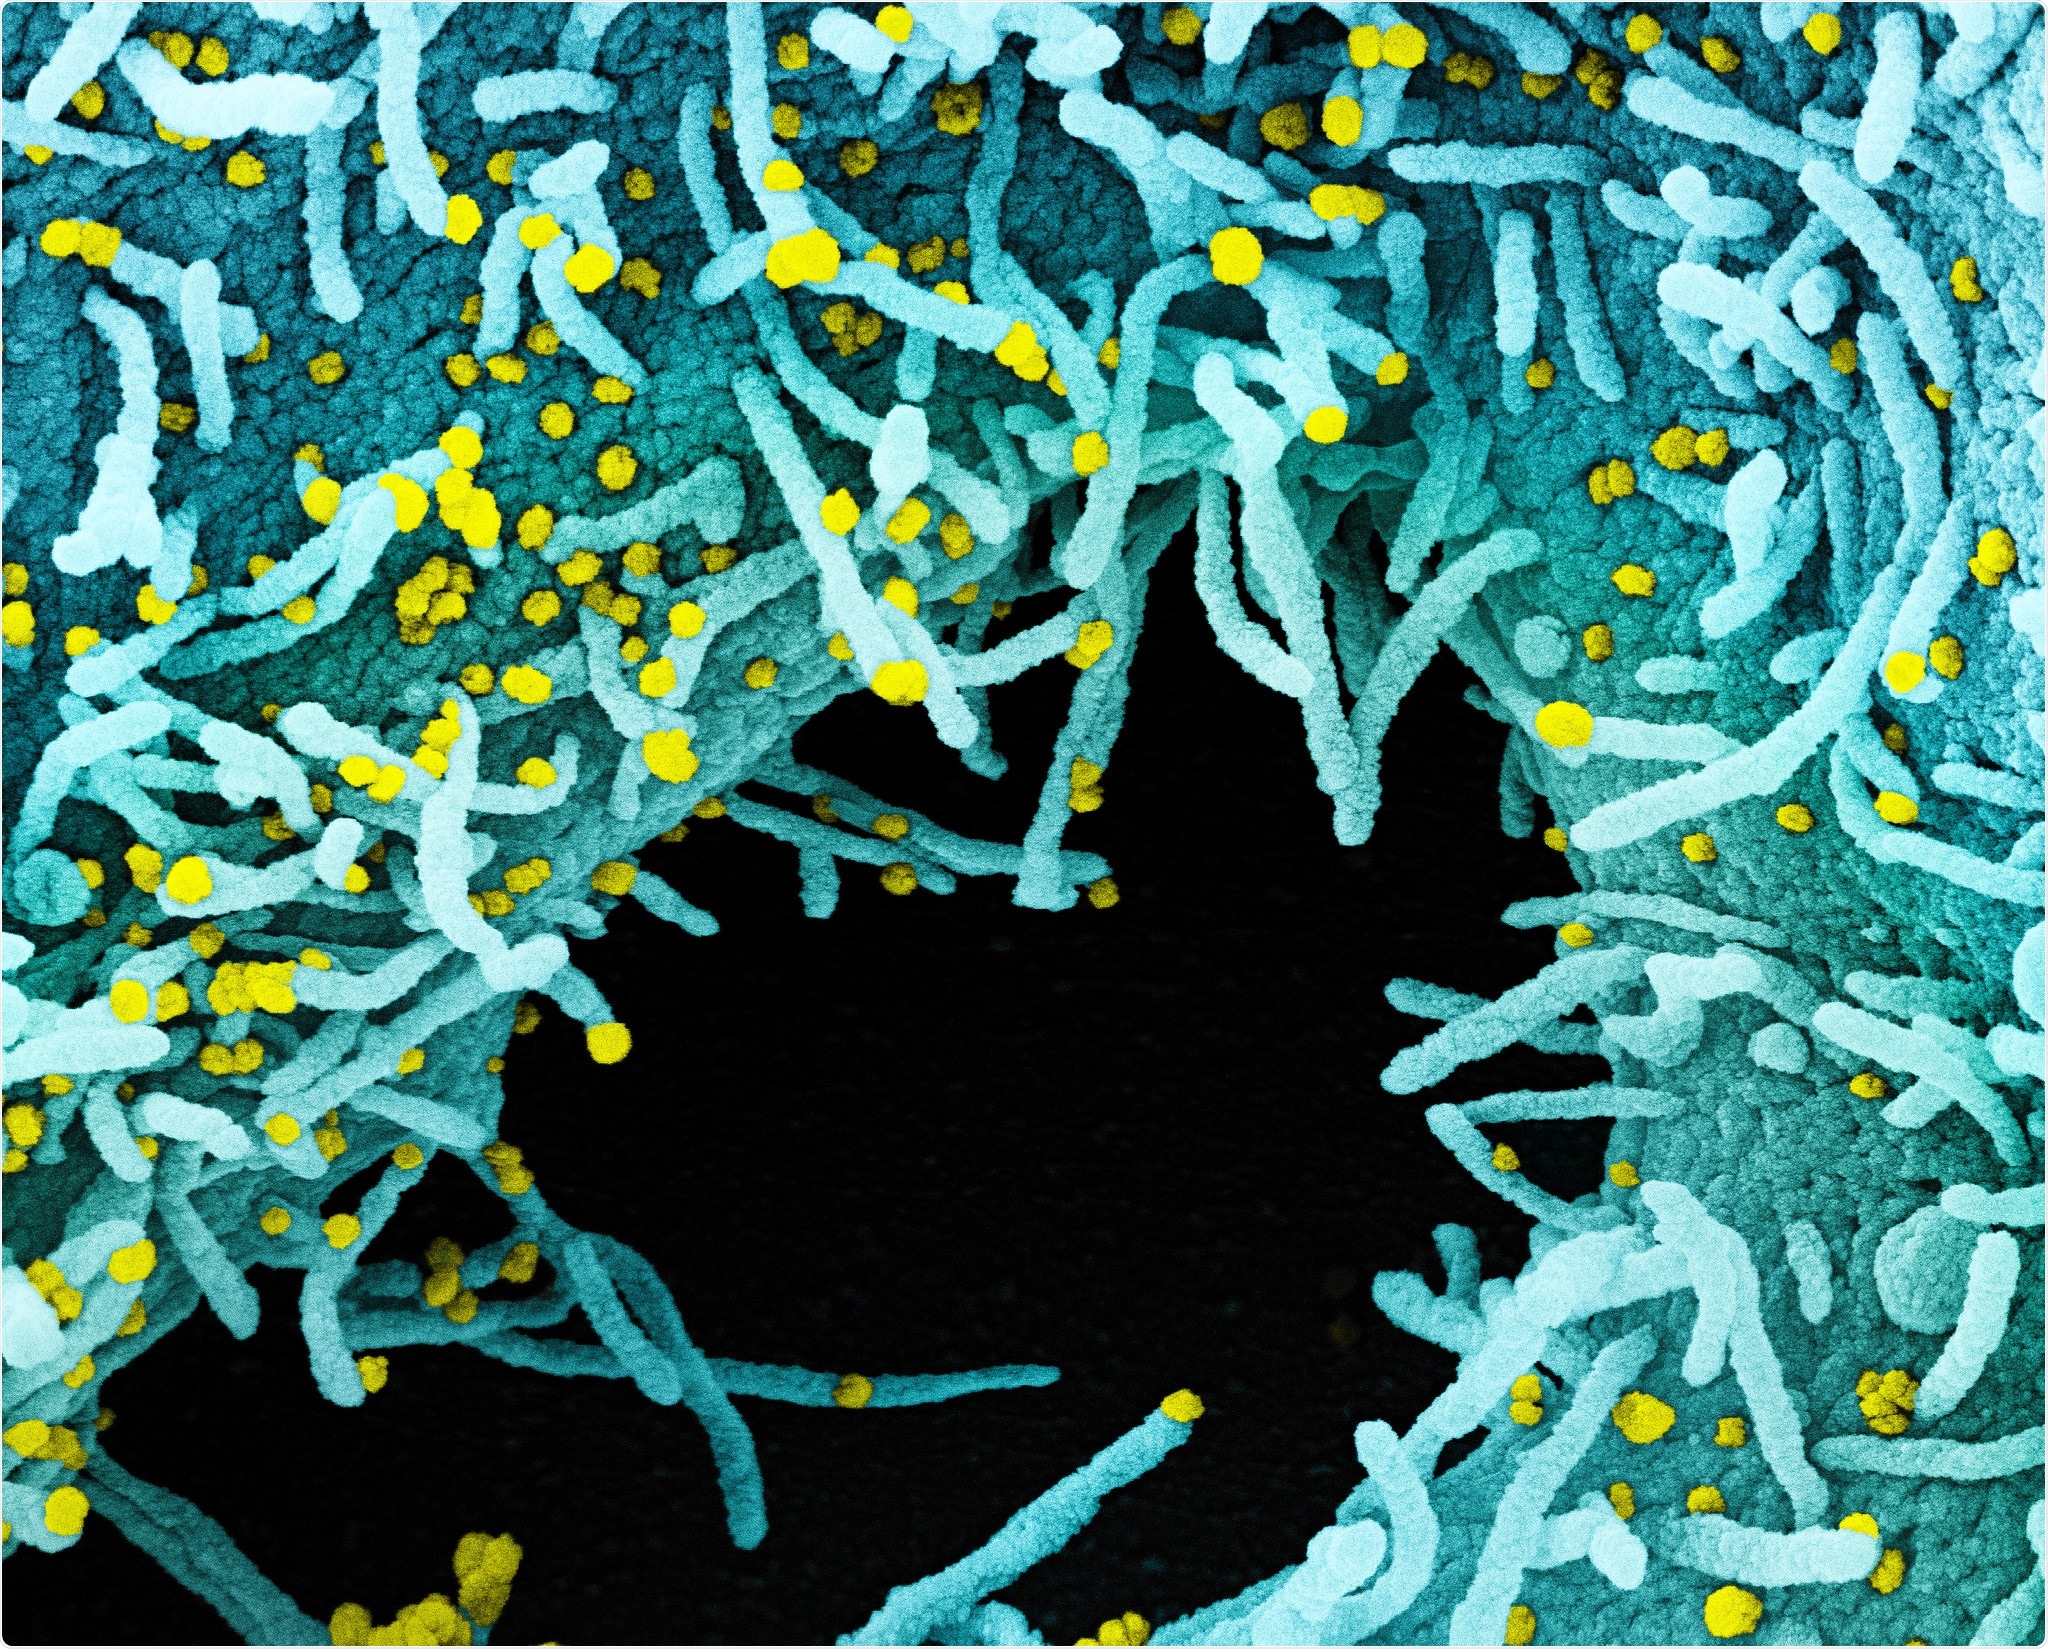 Novel Coronavirus SARS-CoV-2 Colorized scanning electron micrograph of a cell heavily infected with SARS-CoV-2 virus particles (yellow), isolated from a patient sample. The black area in the image is extracellular space between the cells. Image captured at the NIAID Integrated Research Facility (IRF) in Fort Detrick, Maryland. Credit: NIAID